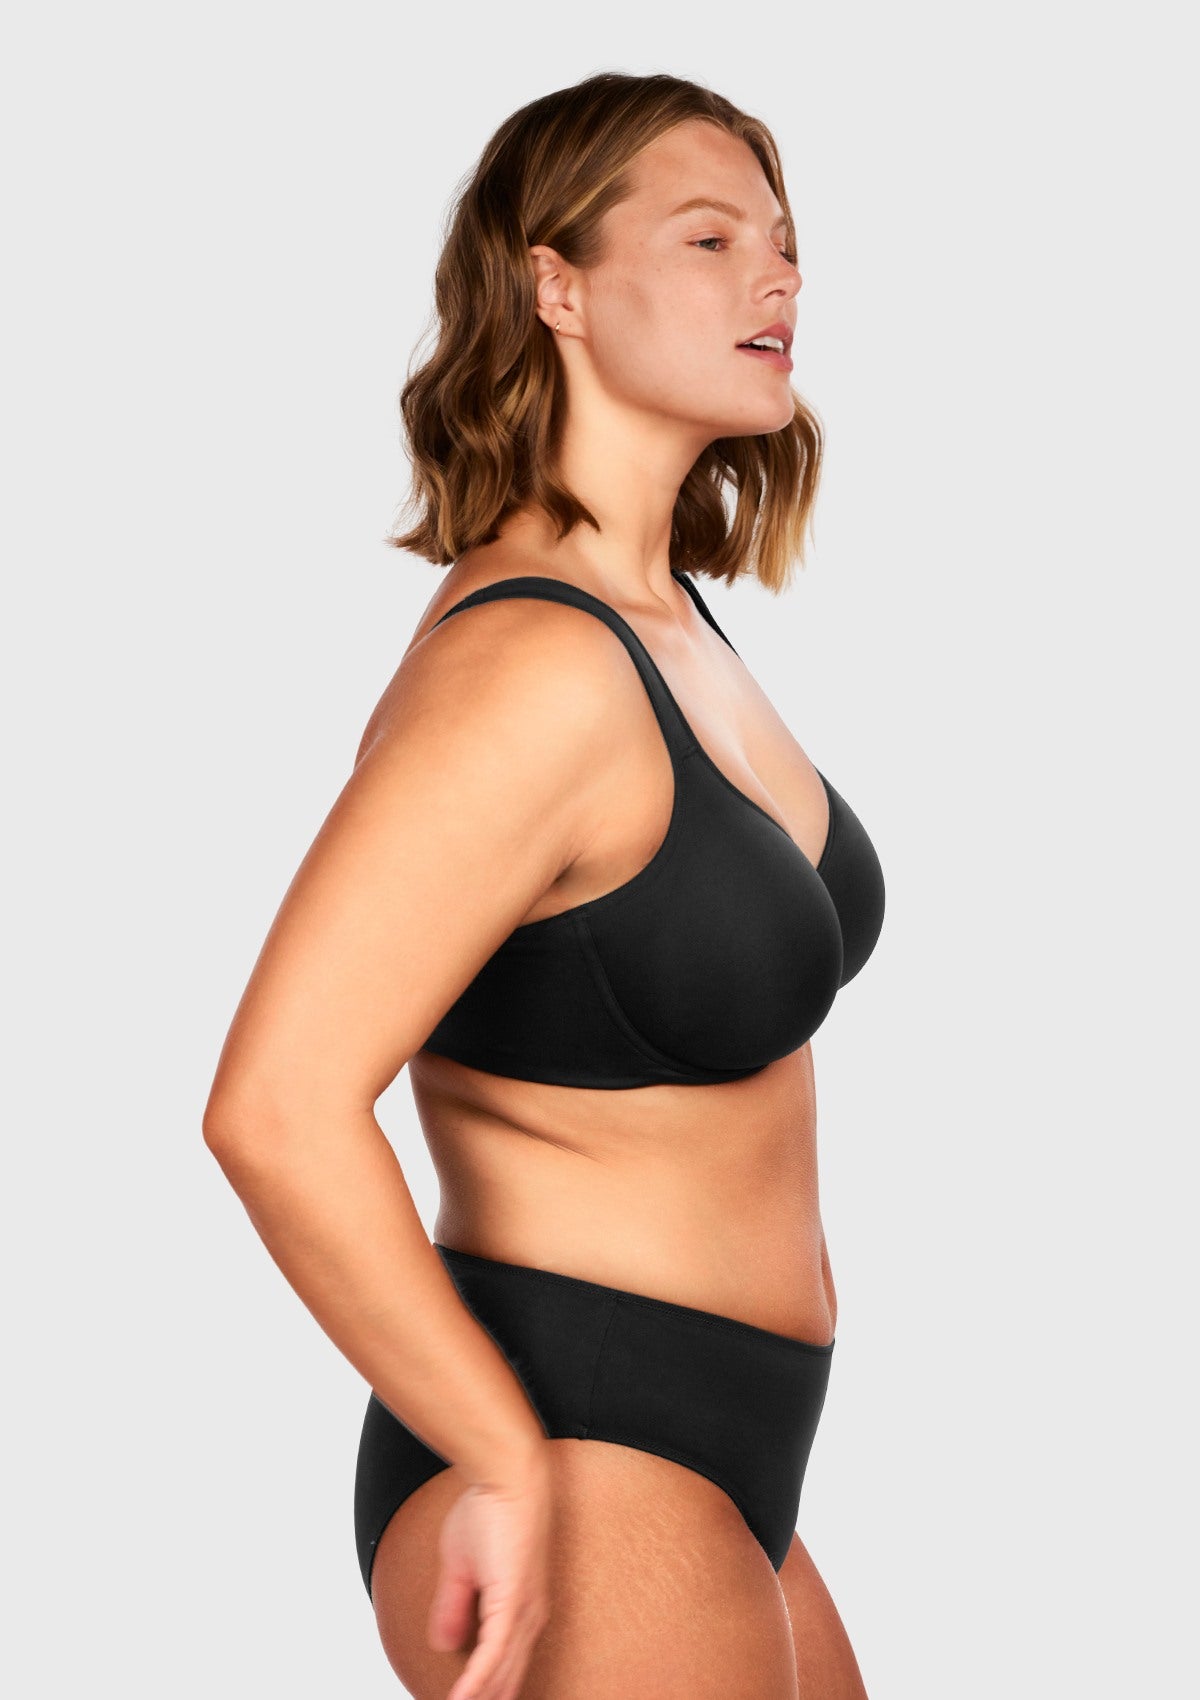 HSIA Joan Soft T-shirt Unlined Non-Padded Soft Cup Minimizer Bra - Black / 34 / H